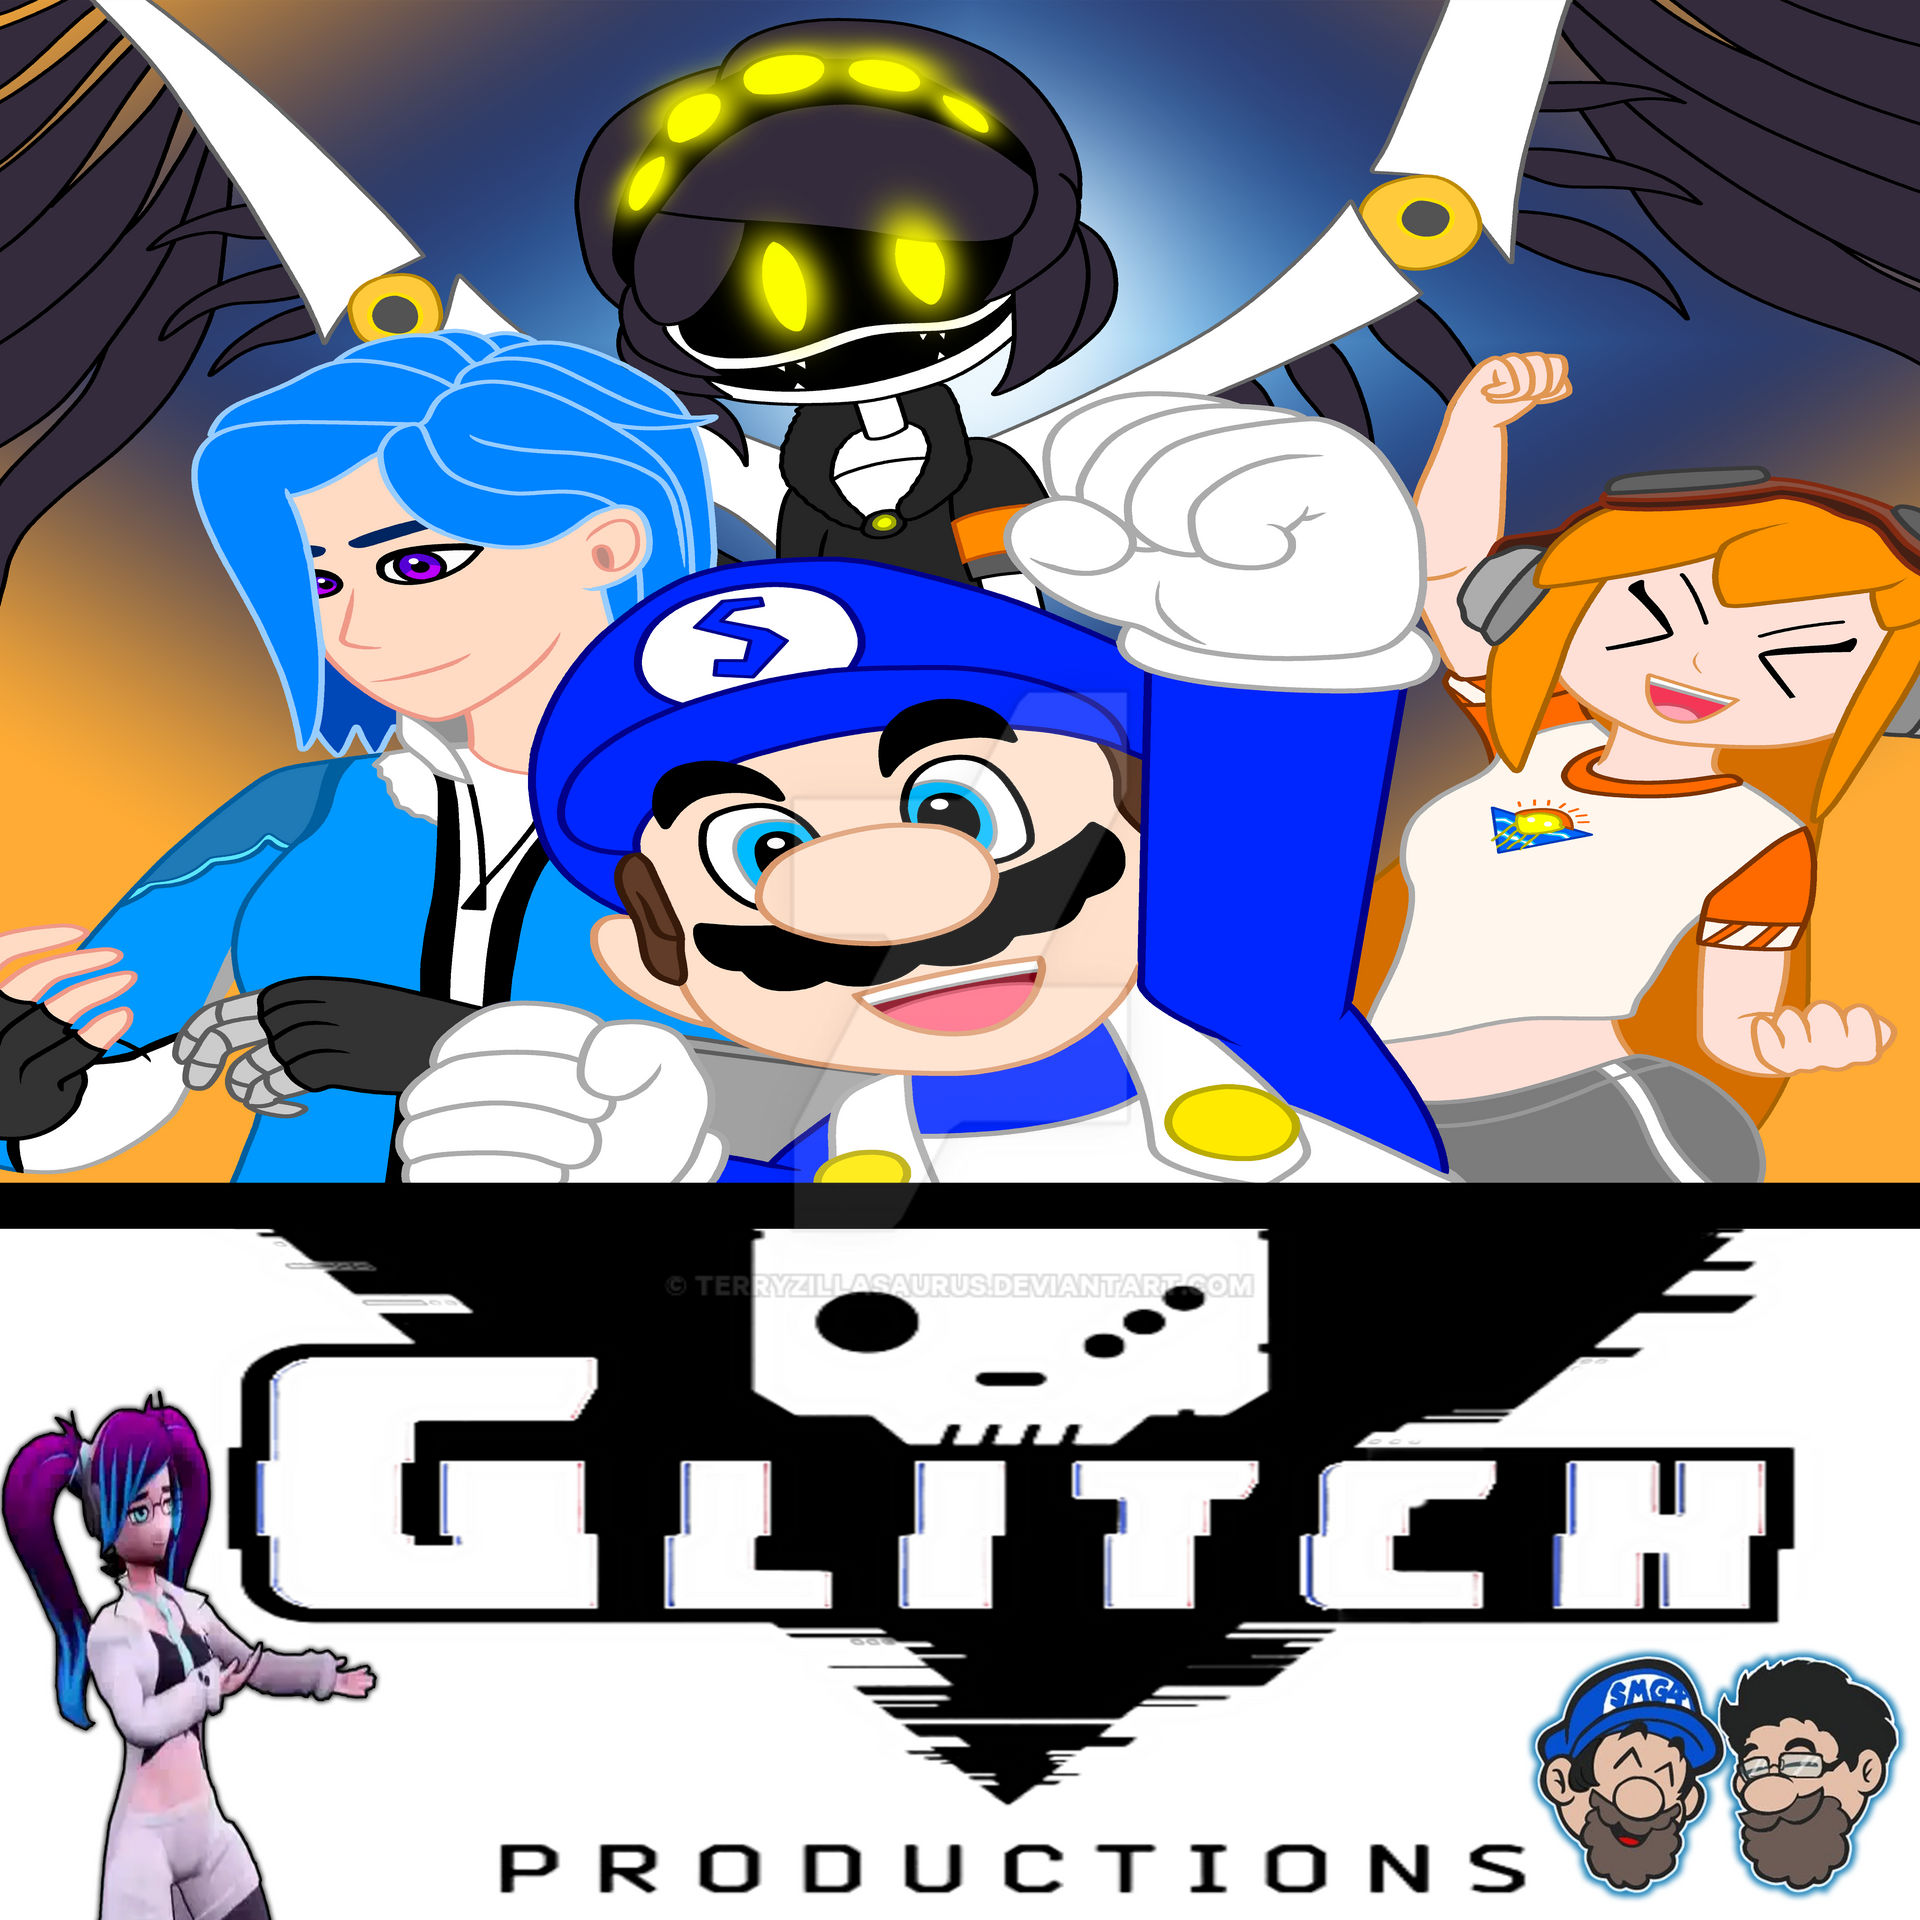 Glitch Productions Poster by TerryZillasaurus on DeviantArt